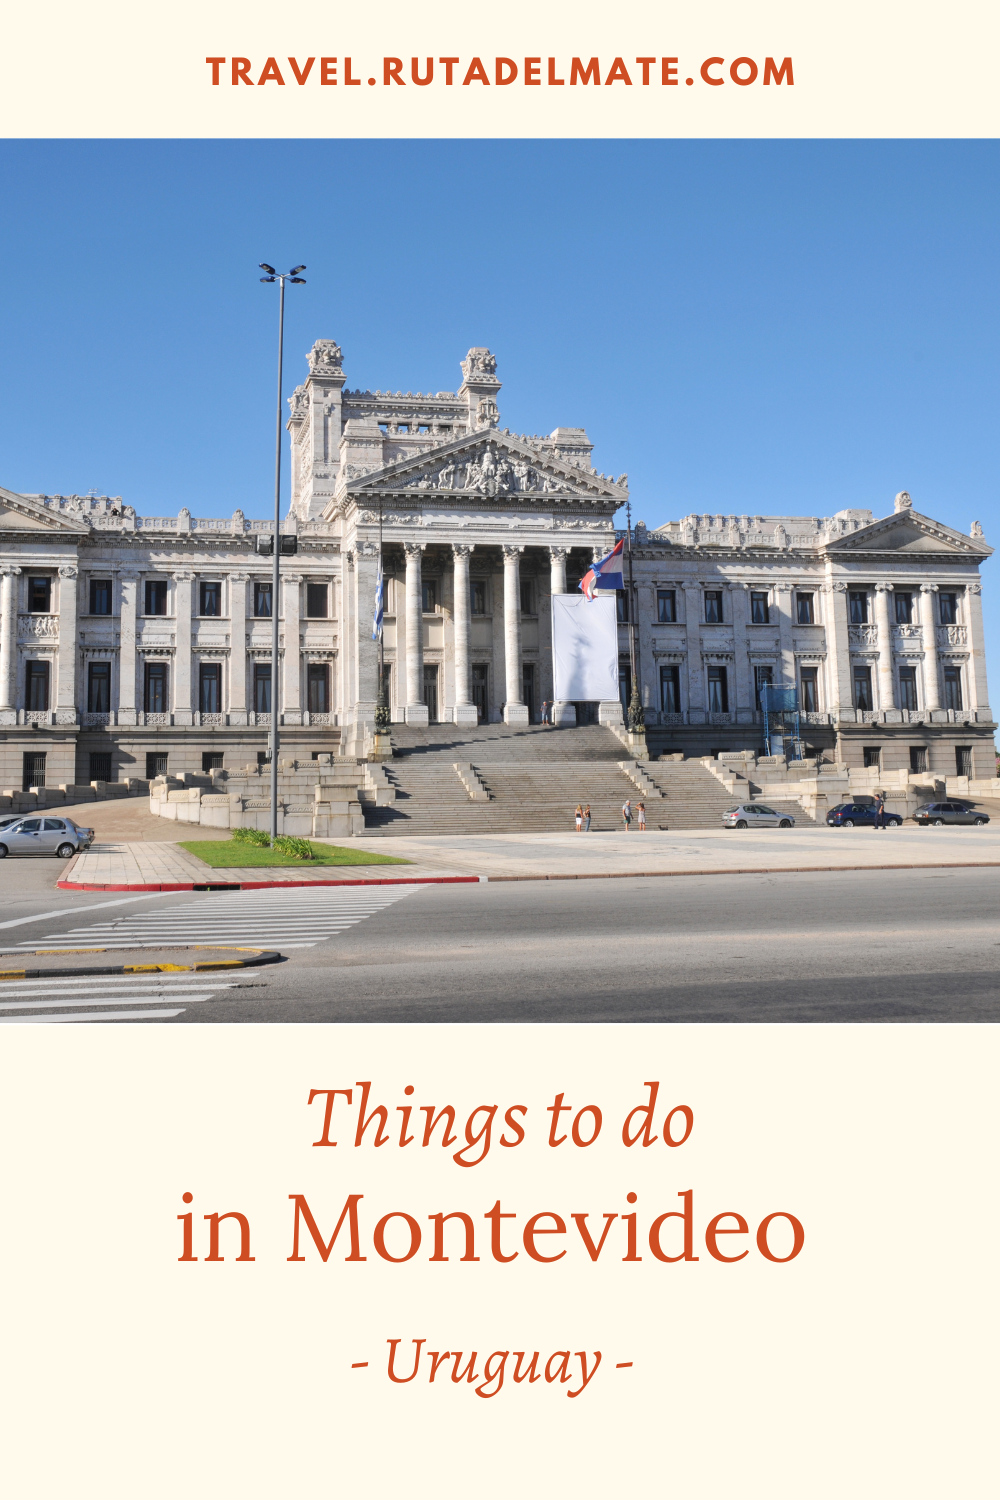 Things to do in Montevideo